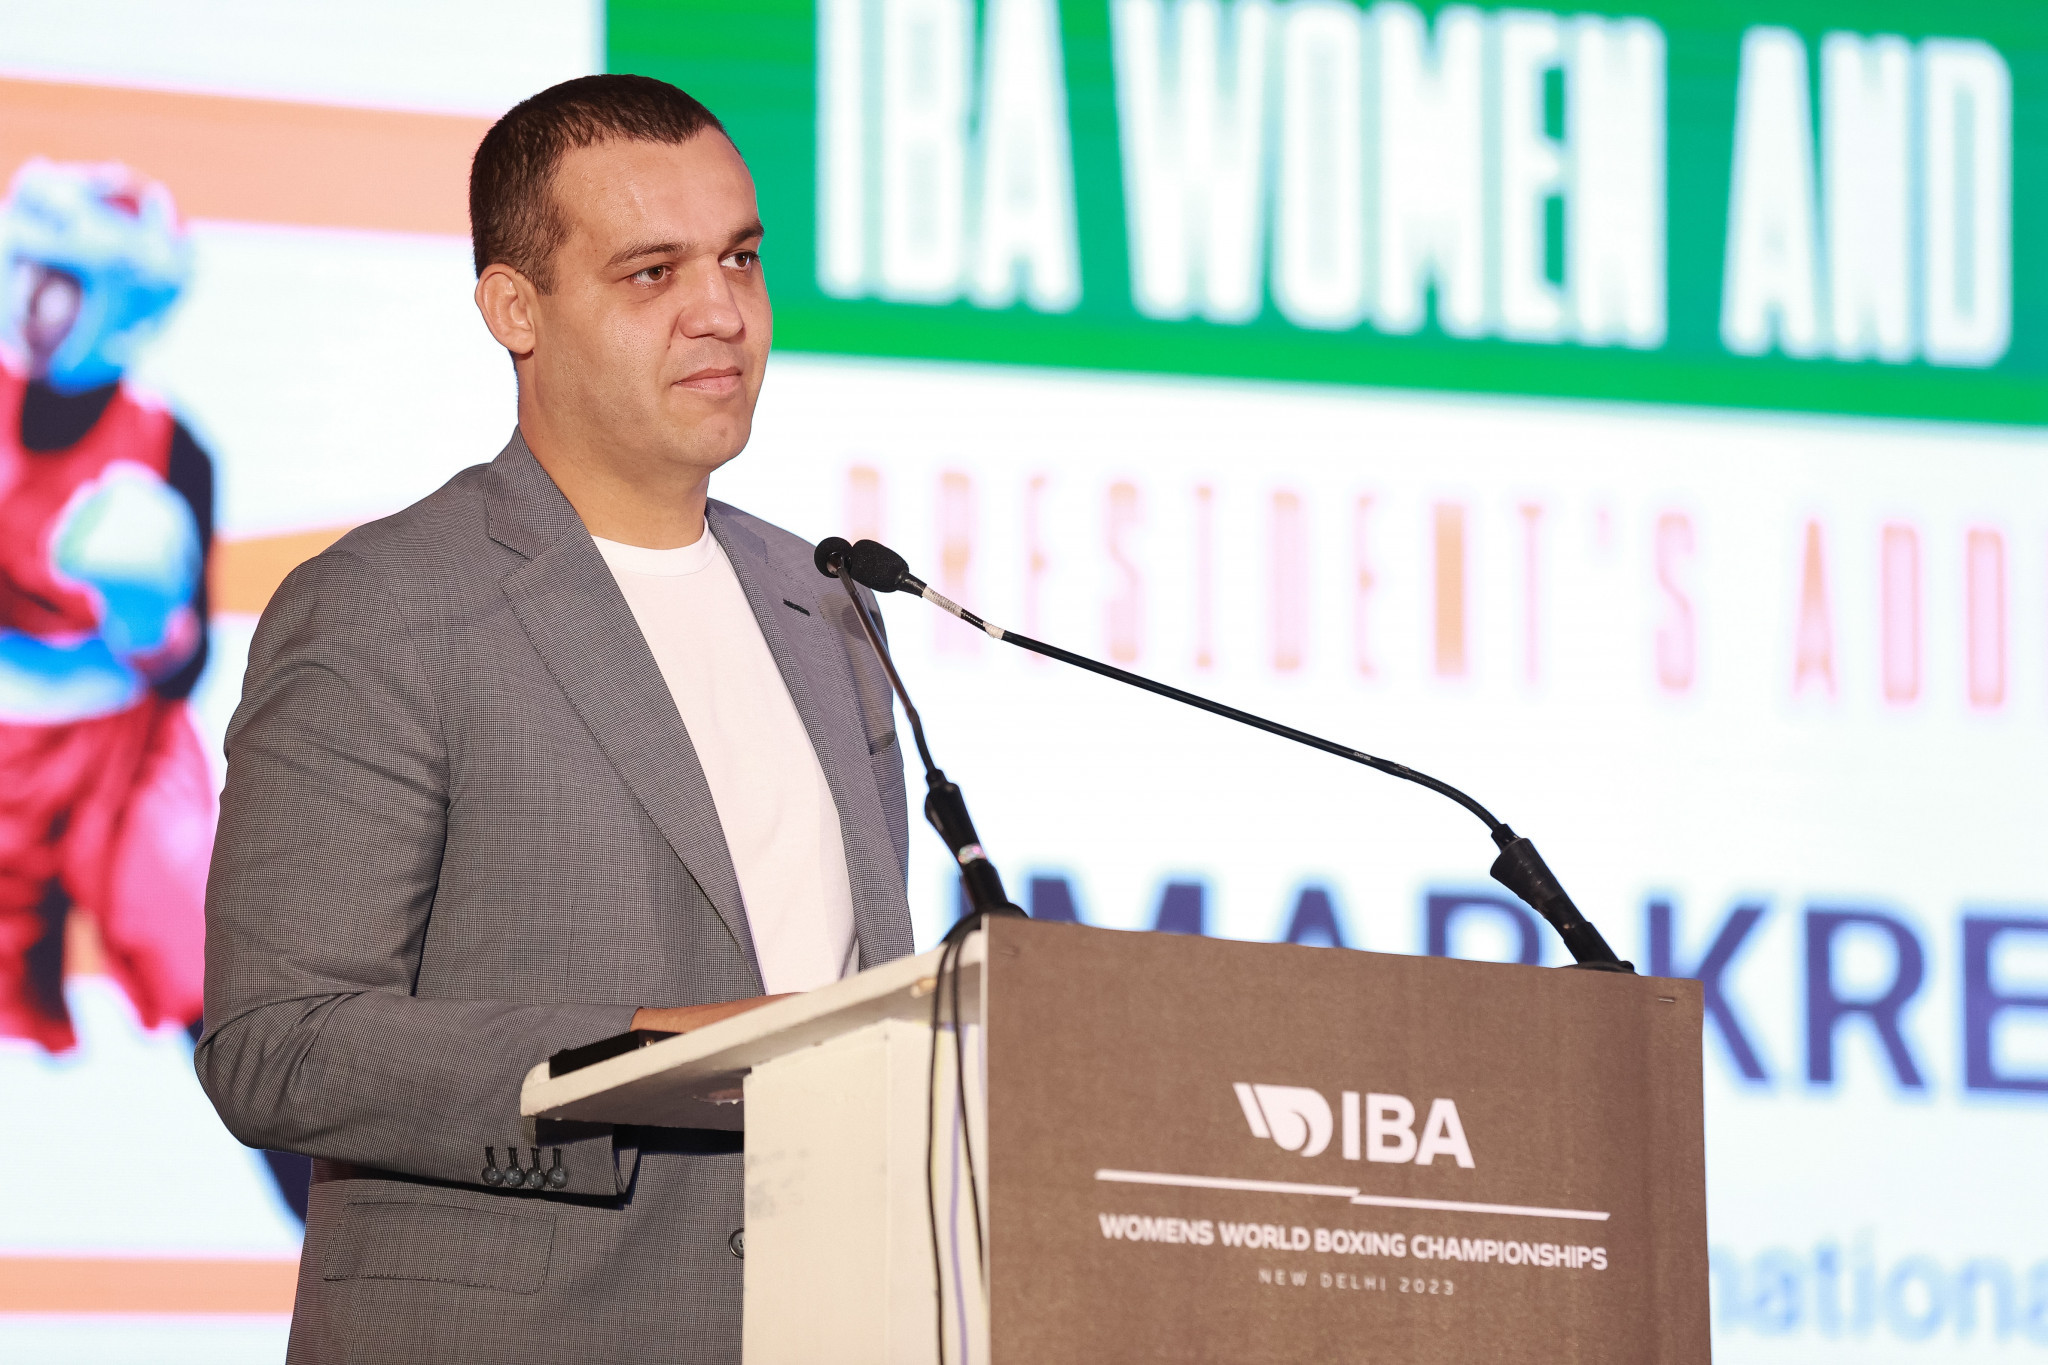 Prospects of the IBA being involved at the Los Angeles 2028 Olympics under President Umar Kremlev appear remote, but it is having an impact on Paris 2024 preparations despite its ongoing suspension ©IBA